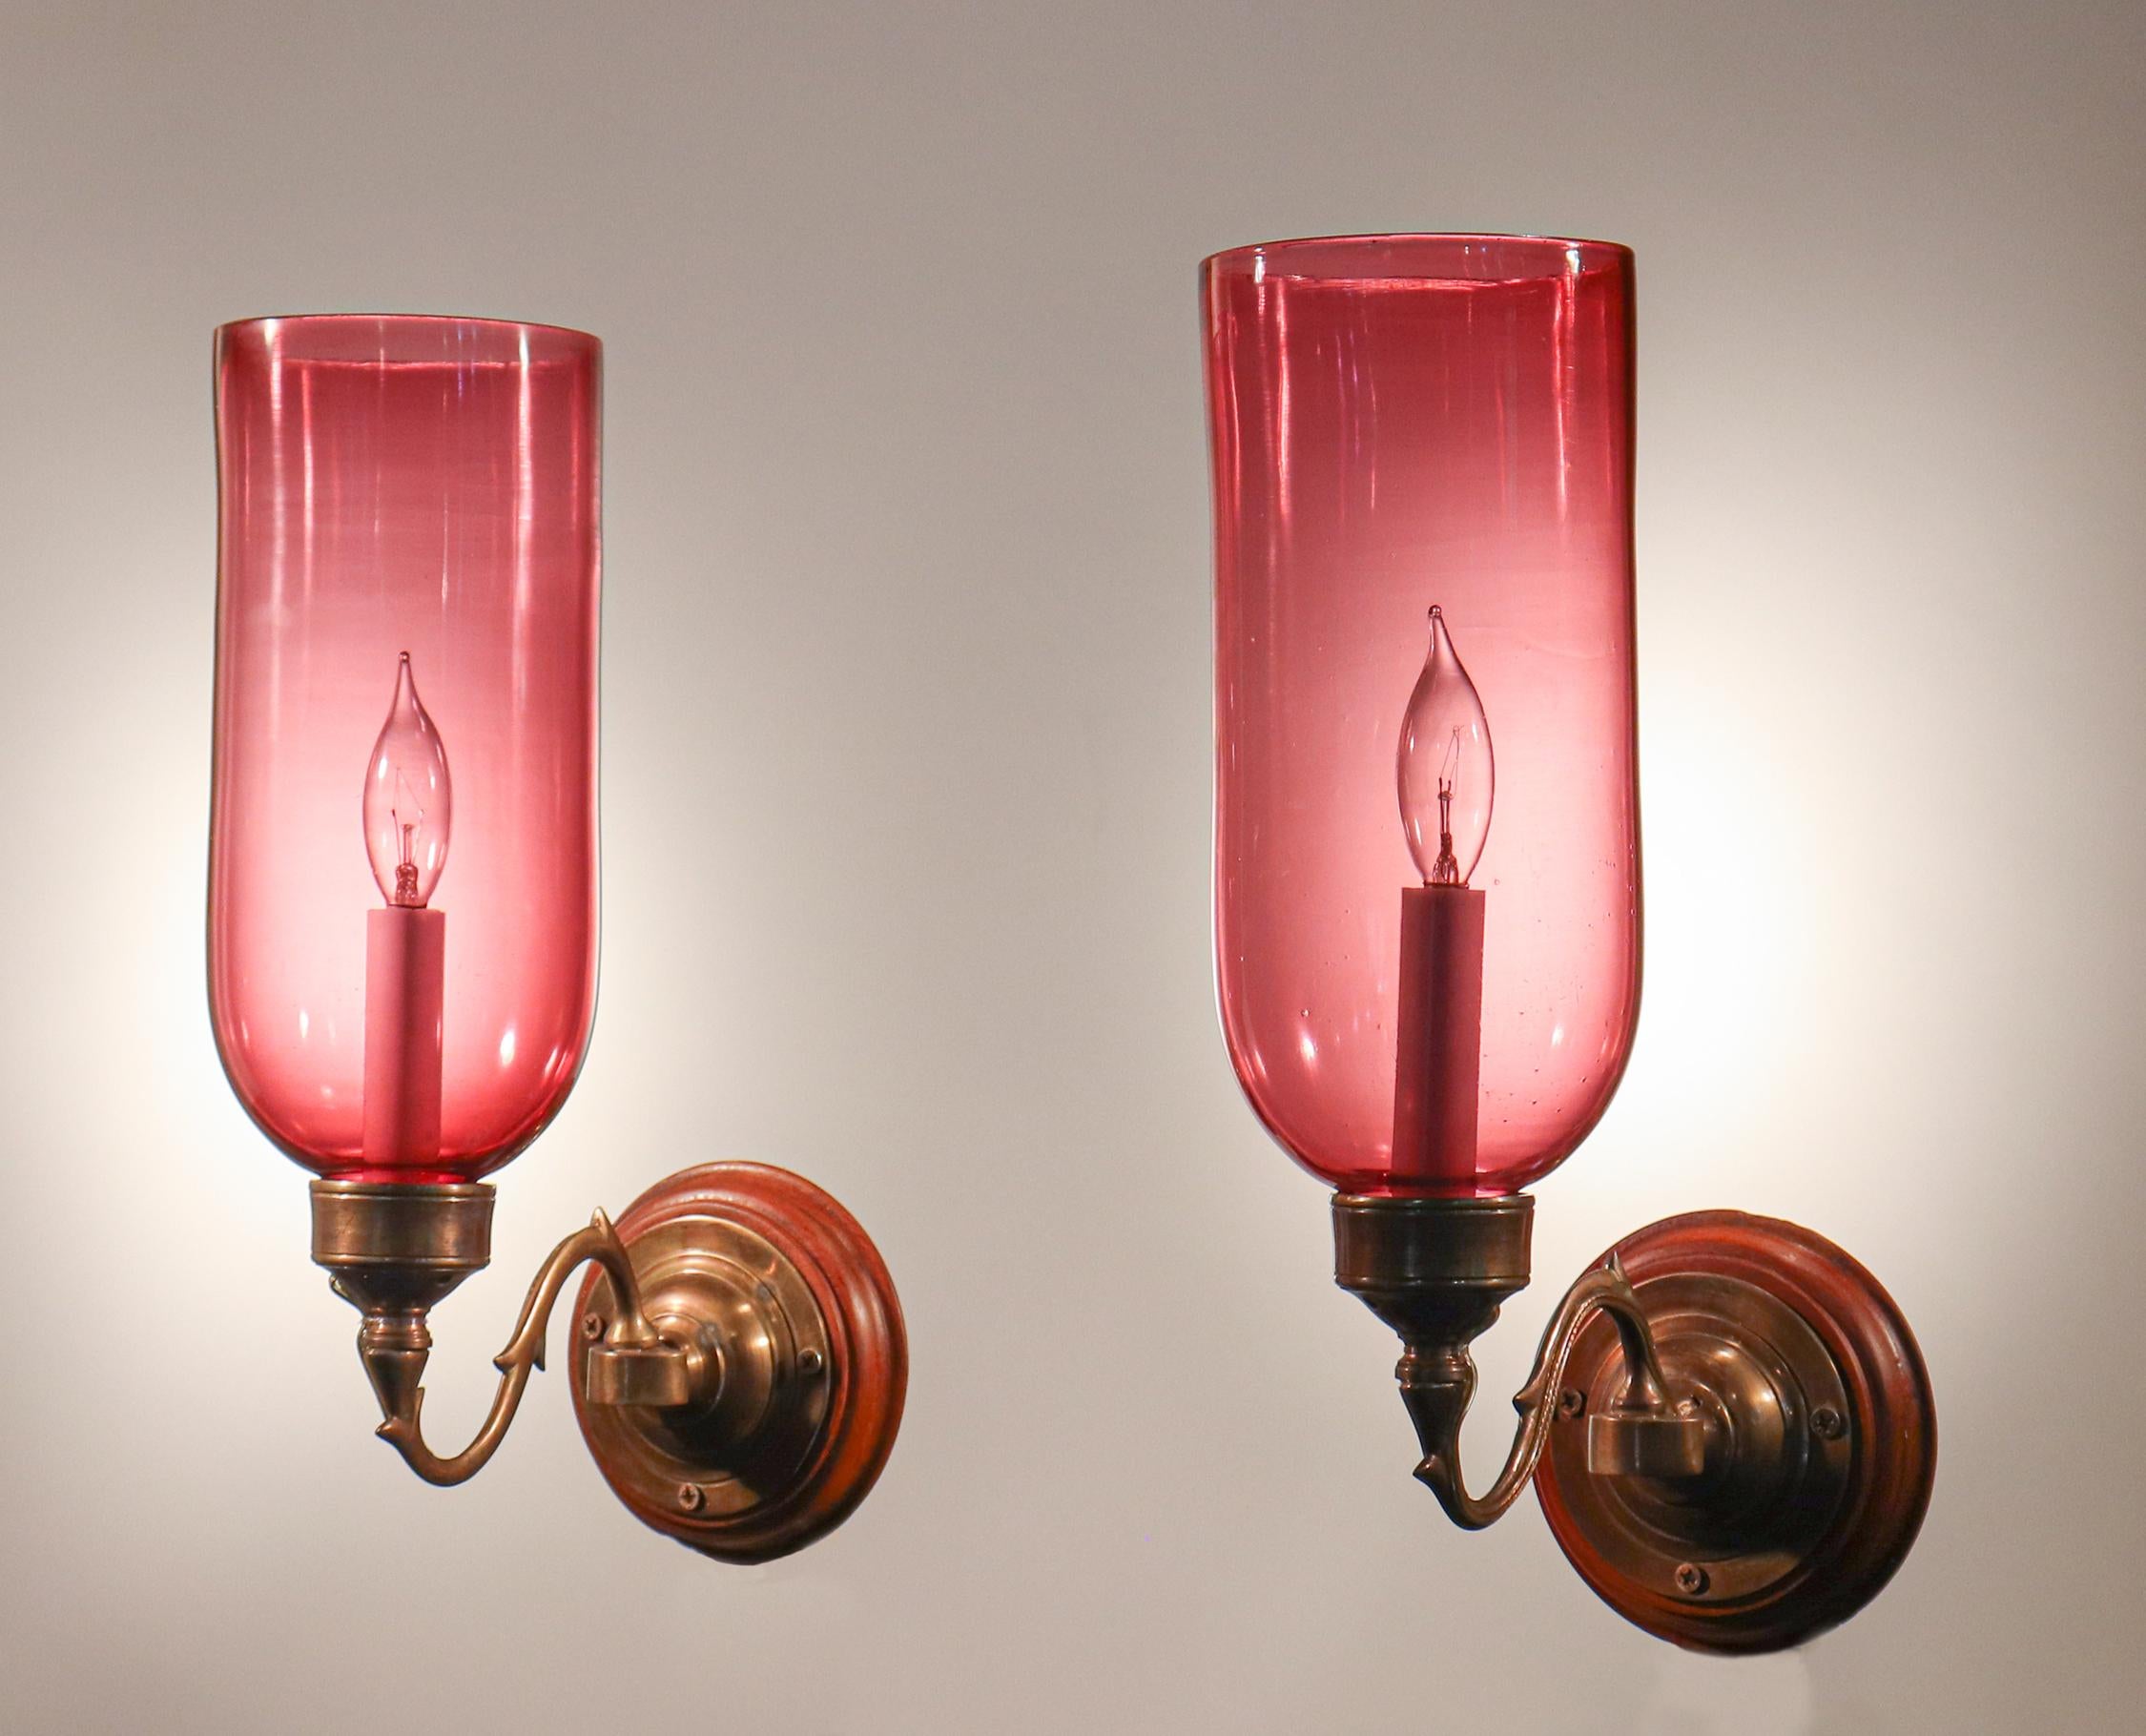 A beautiful pair of English cranberry glass hurricane sconce shades with straight form and excellent quality hand blown glass. Originally for candles, the sconces have been newly electrified, each taking a single candelabra bulb accommodating up to